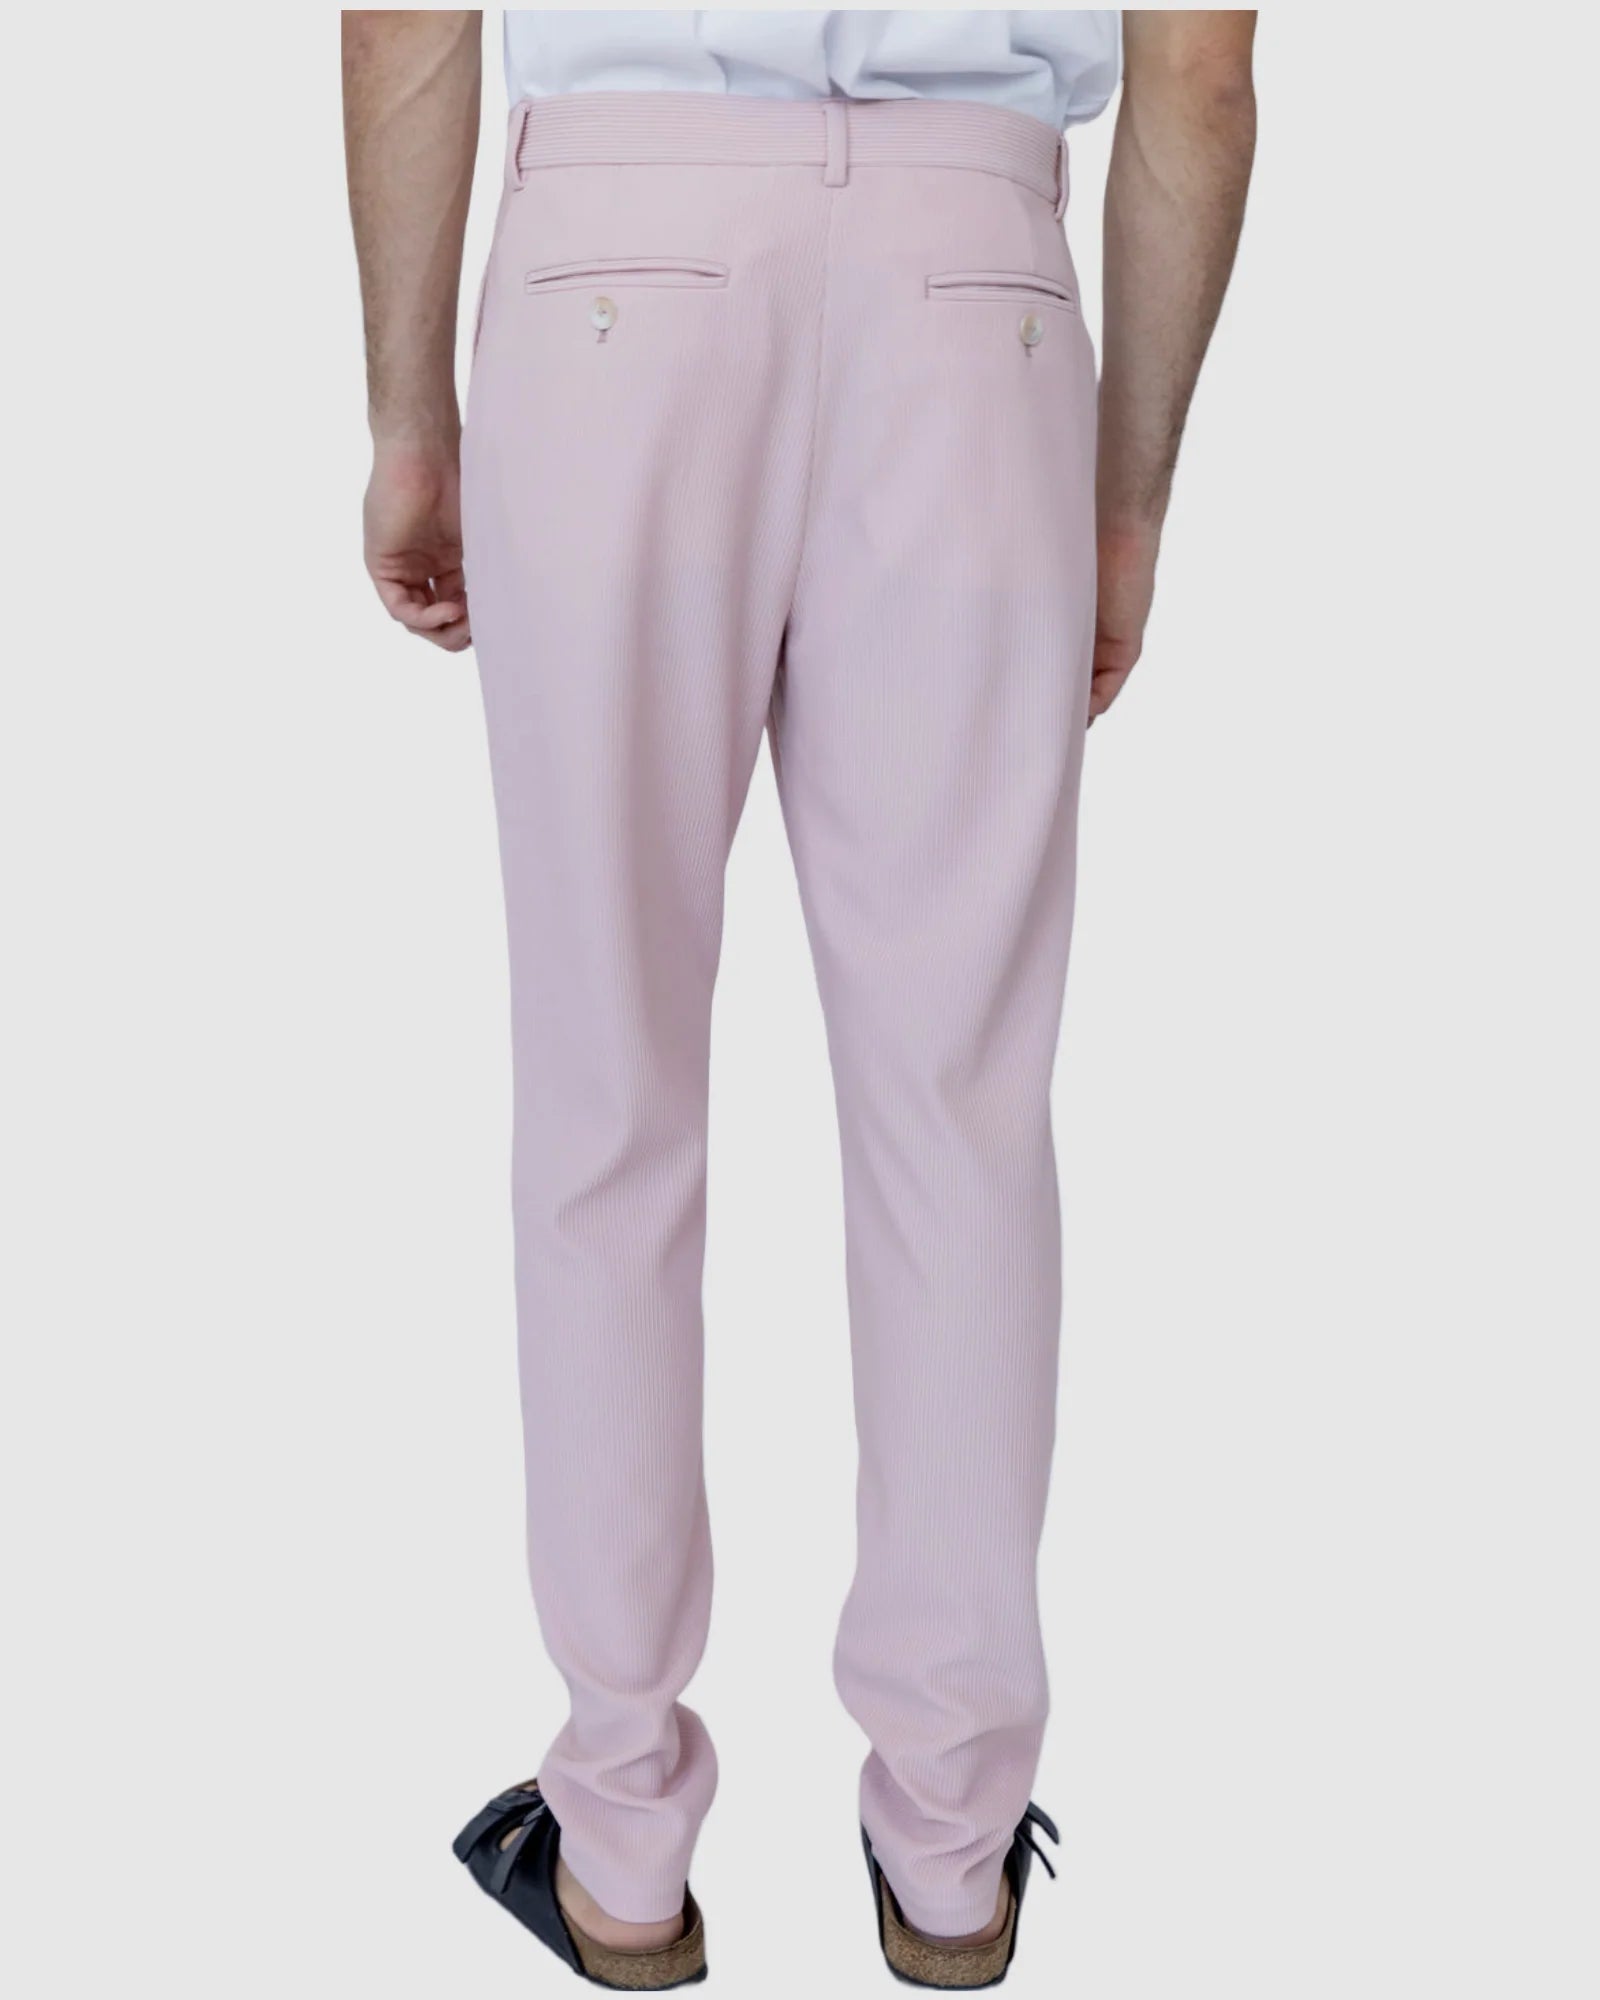 Justin Cassin Pacey Ribbed Trousers in Pink Color 4